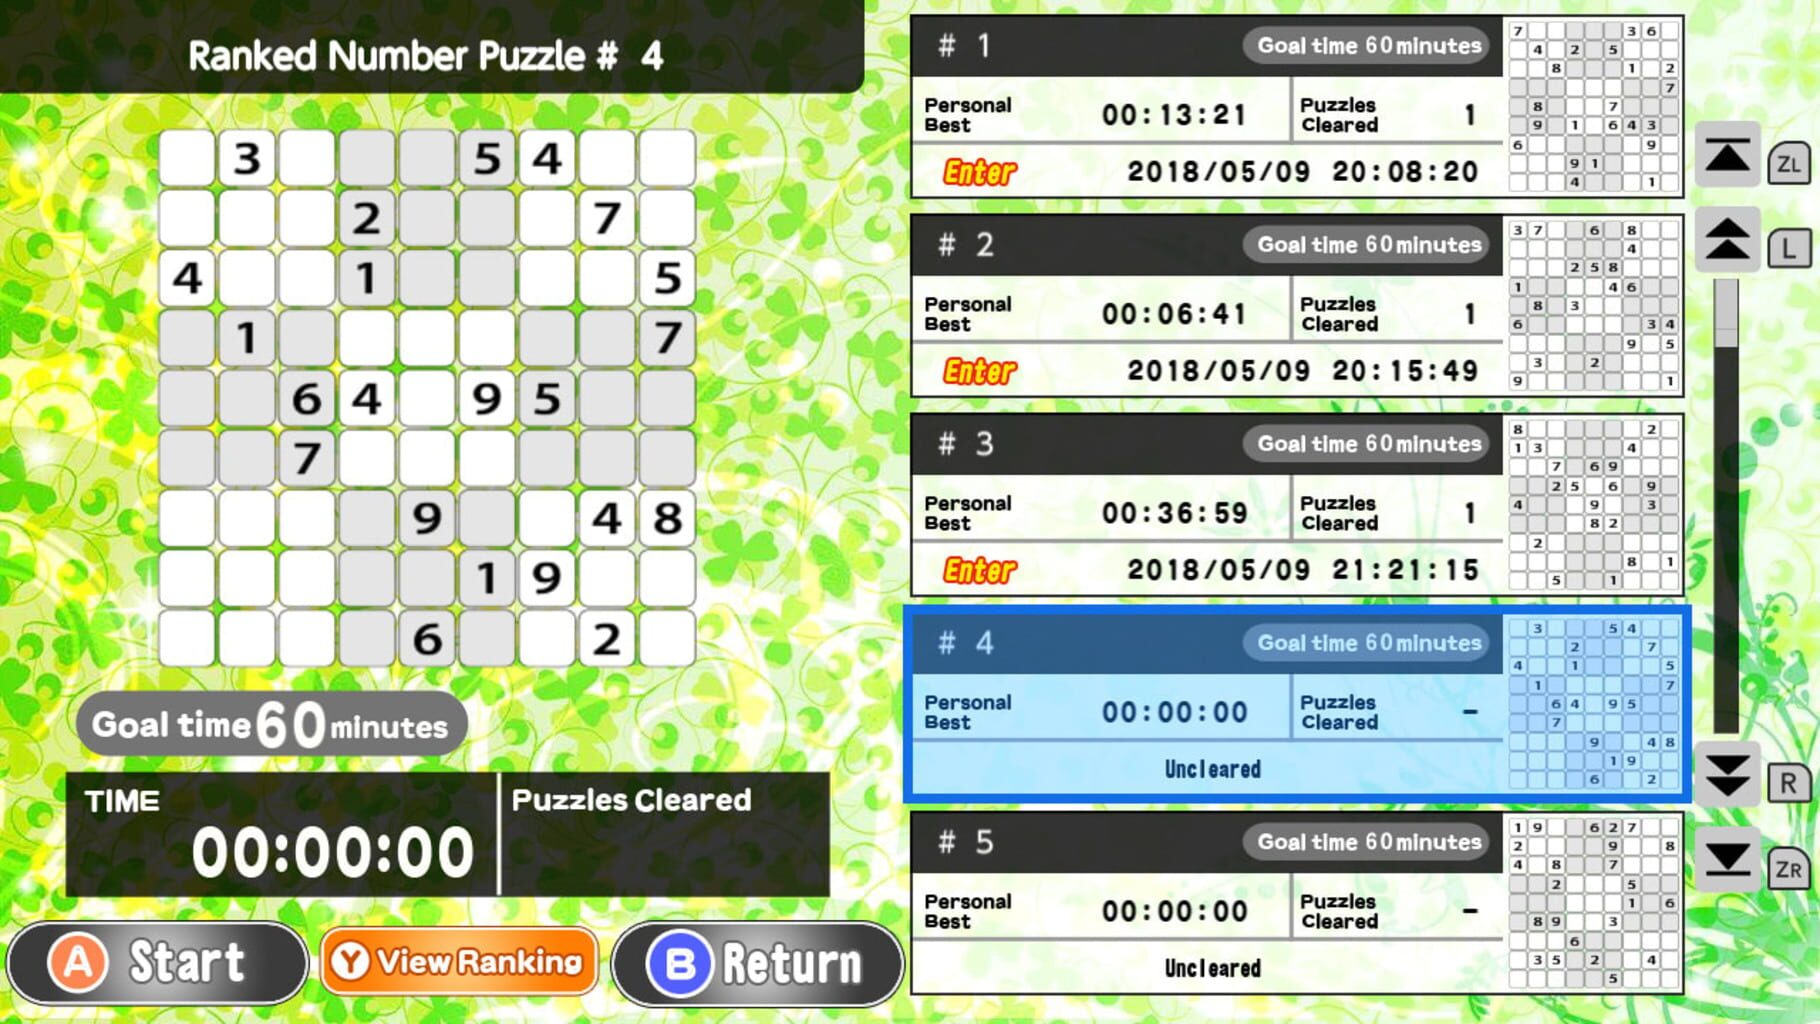 The Number Puzzle screenshot